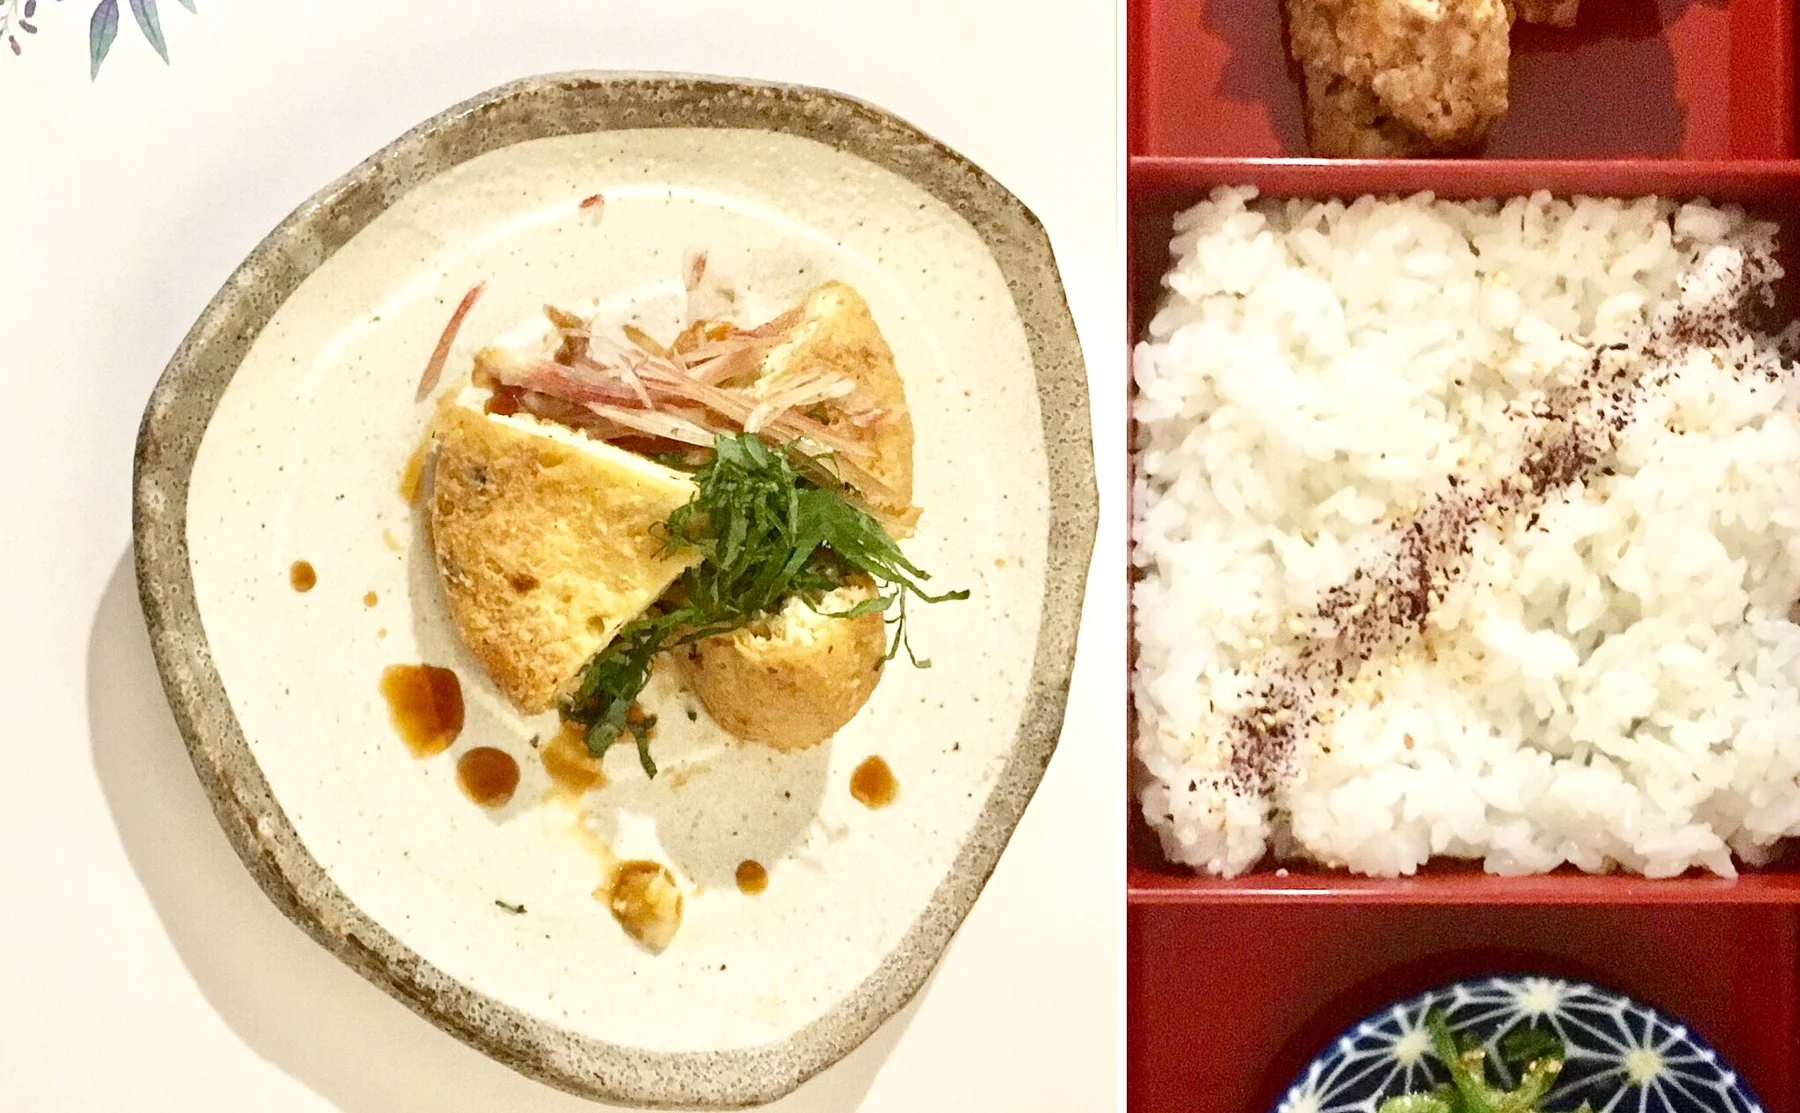 Japanese Bento dinner with a chef in old-town Yanaka Tokyo - 1273473